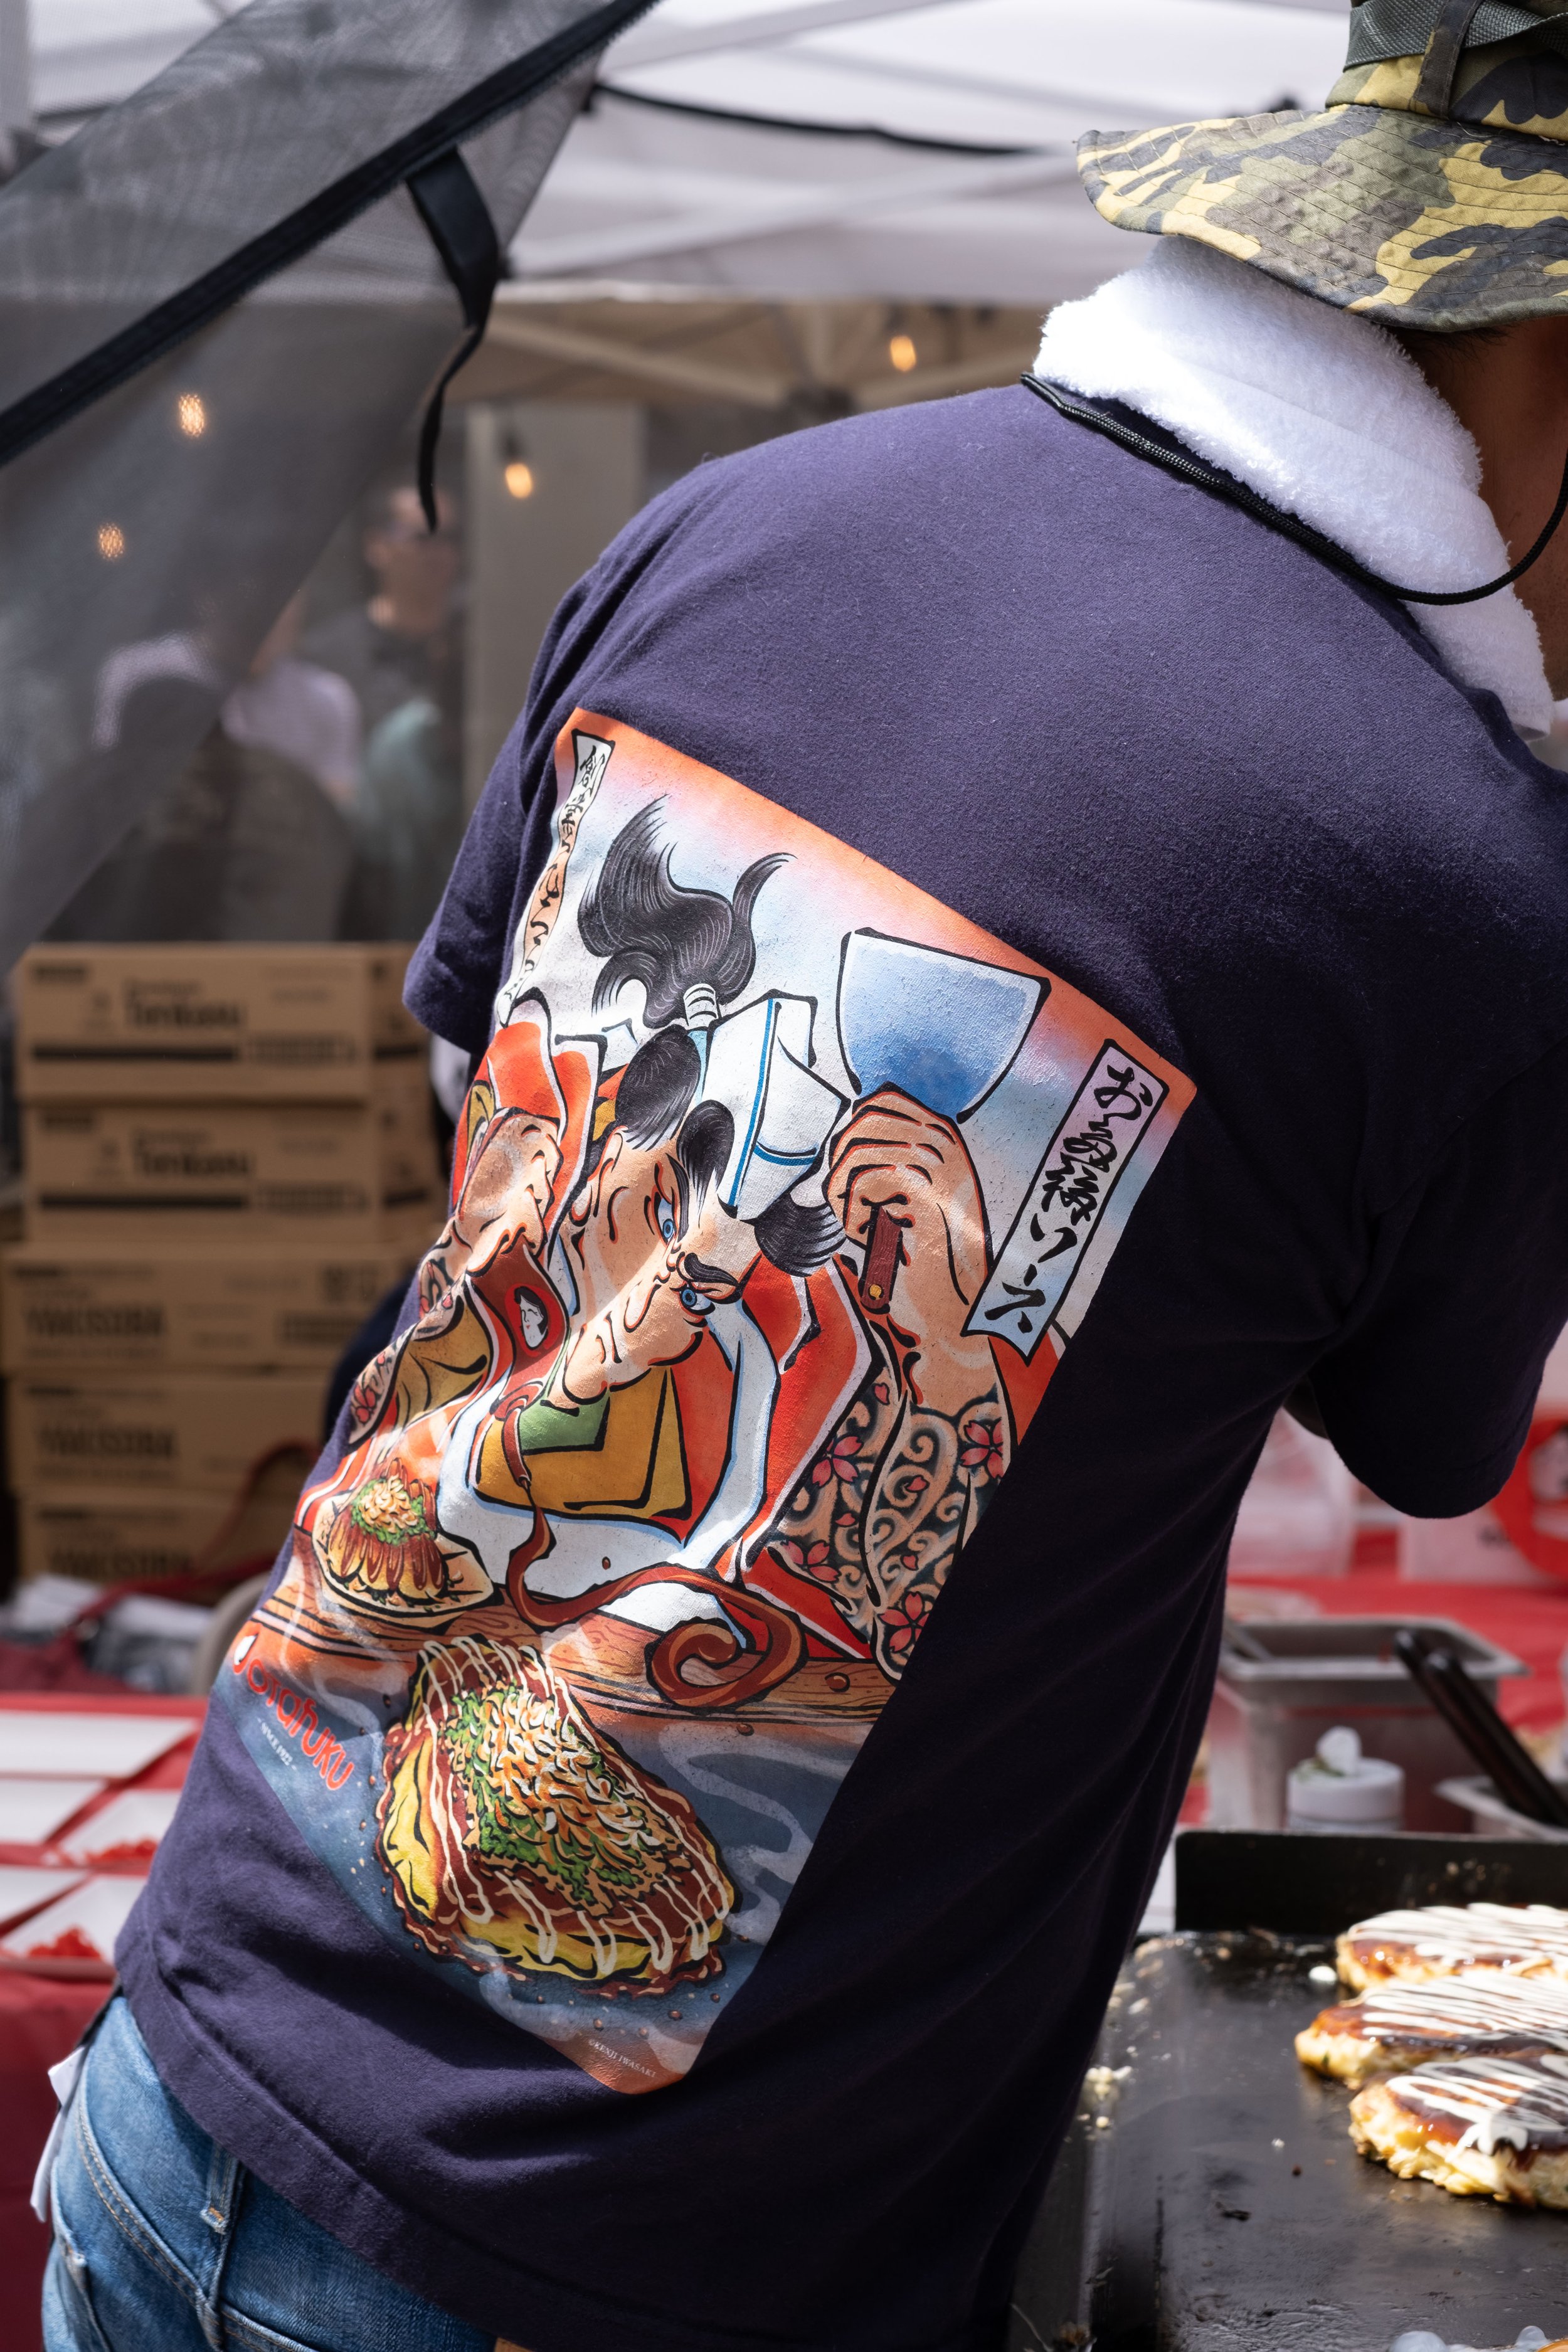  Food booths prepared many types of traditional Japanese food. Shown here on the back of a shirt is a picture of a man enjoying "okonomiyaki," a savory pancake, at the Torrance Cultural Arts Center in Torrance, Calif., at the Weekly LALALA 20th Anniv